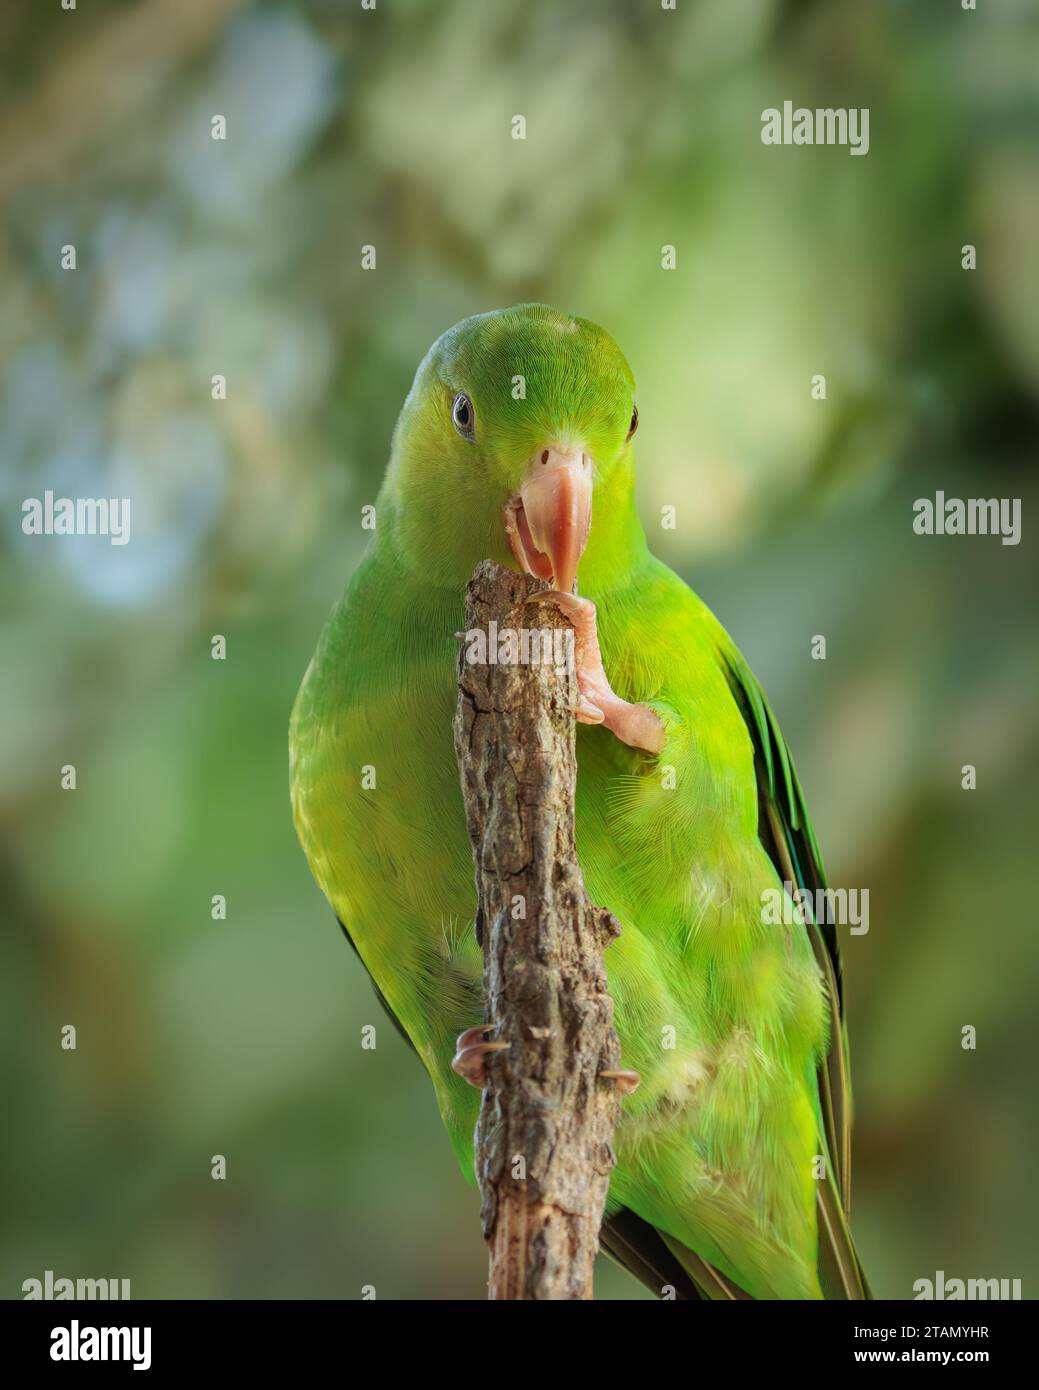 A Plain Parakeet (Brotogeris tirica) in the Atlantic Forest biome of Brazil perching on a tree branch. Stock Photo